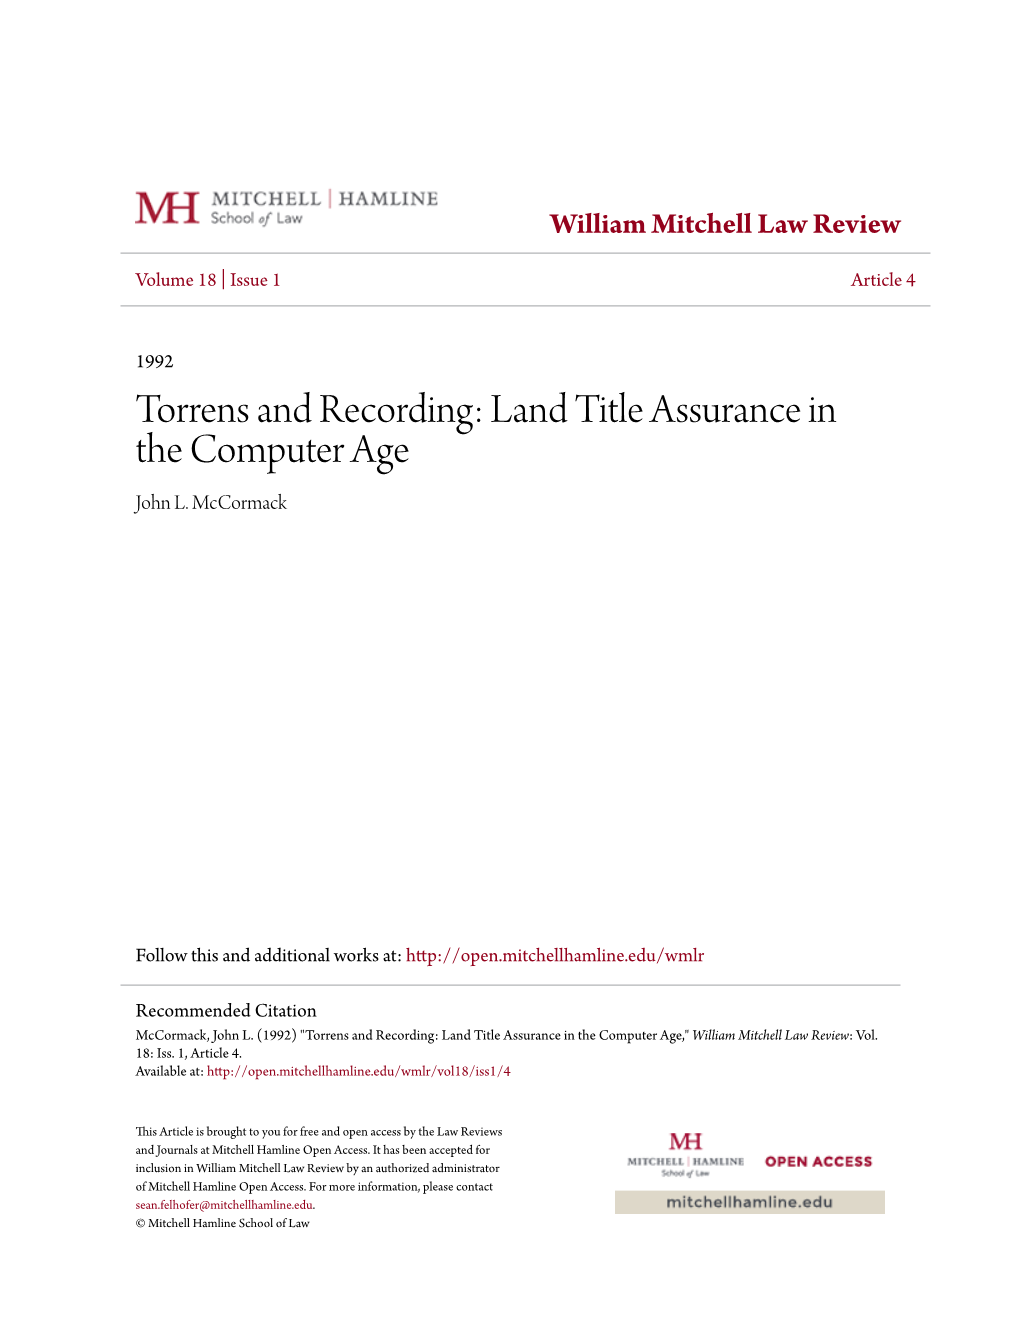 Torrens and Recording: Land Title Assurance in the Computer Age John L